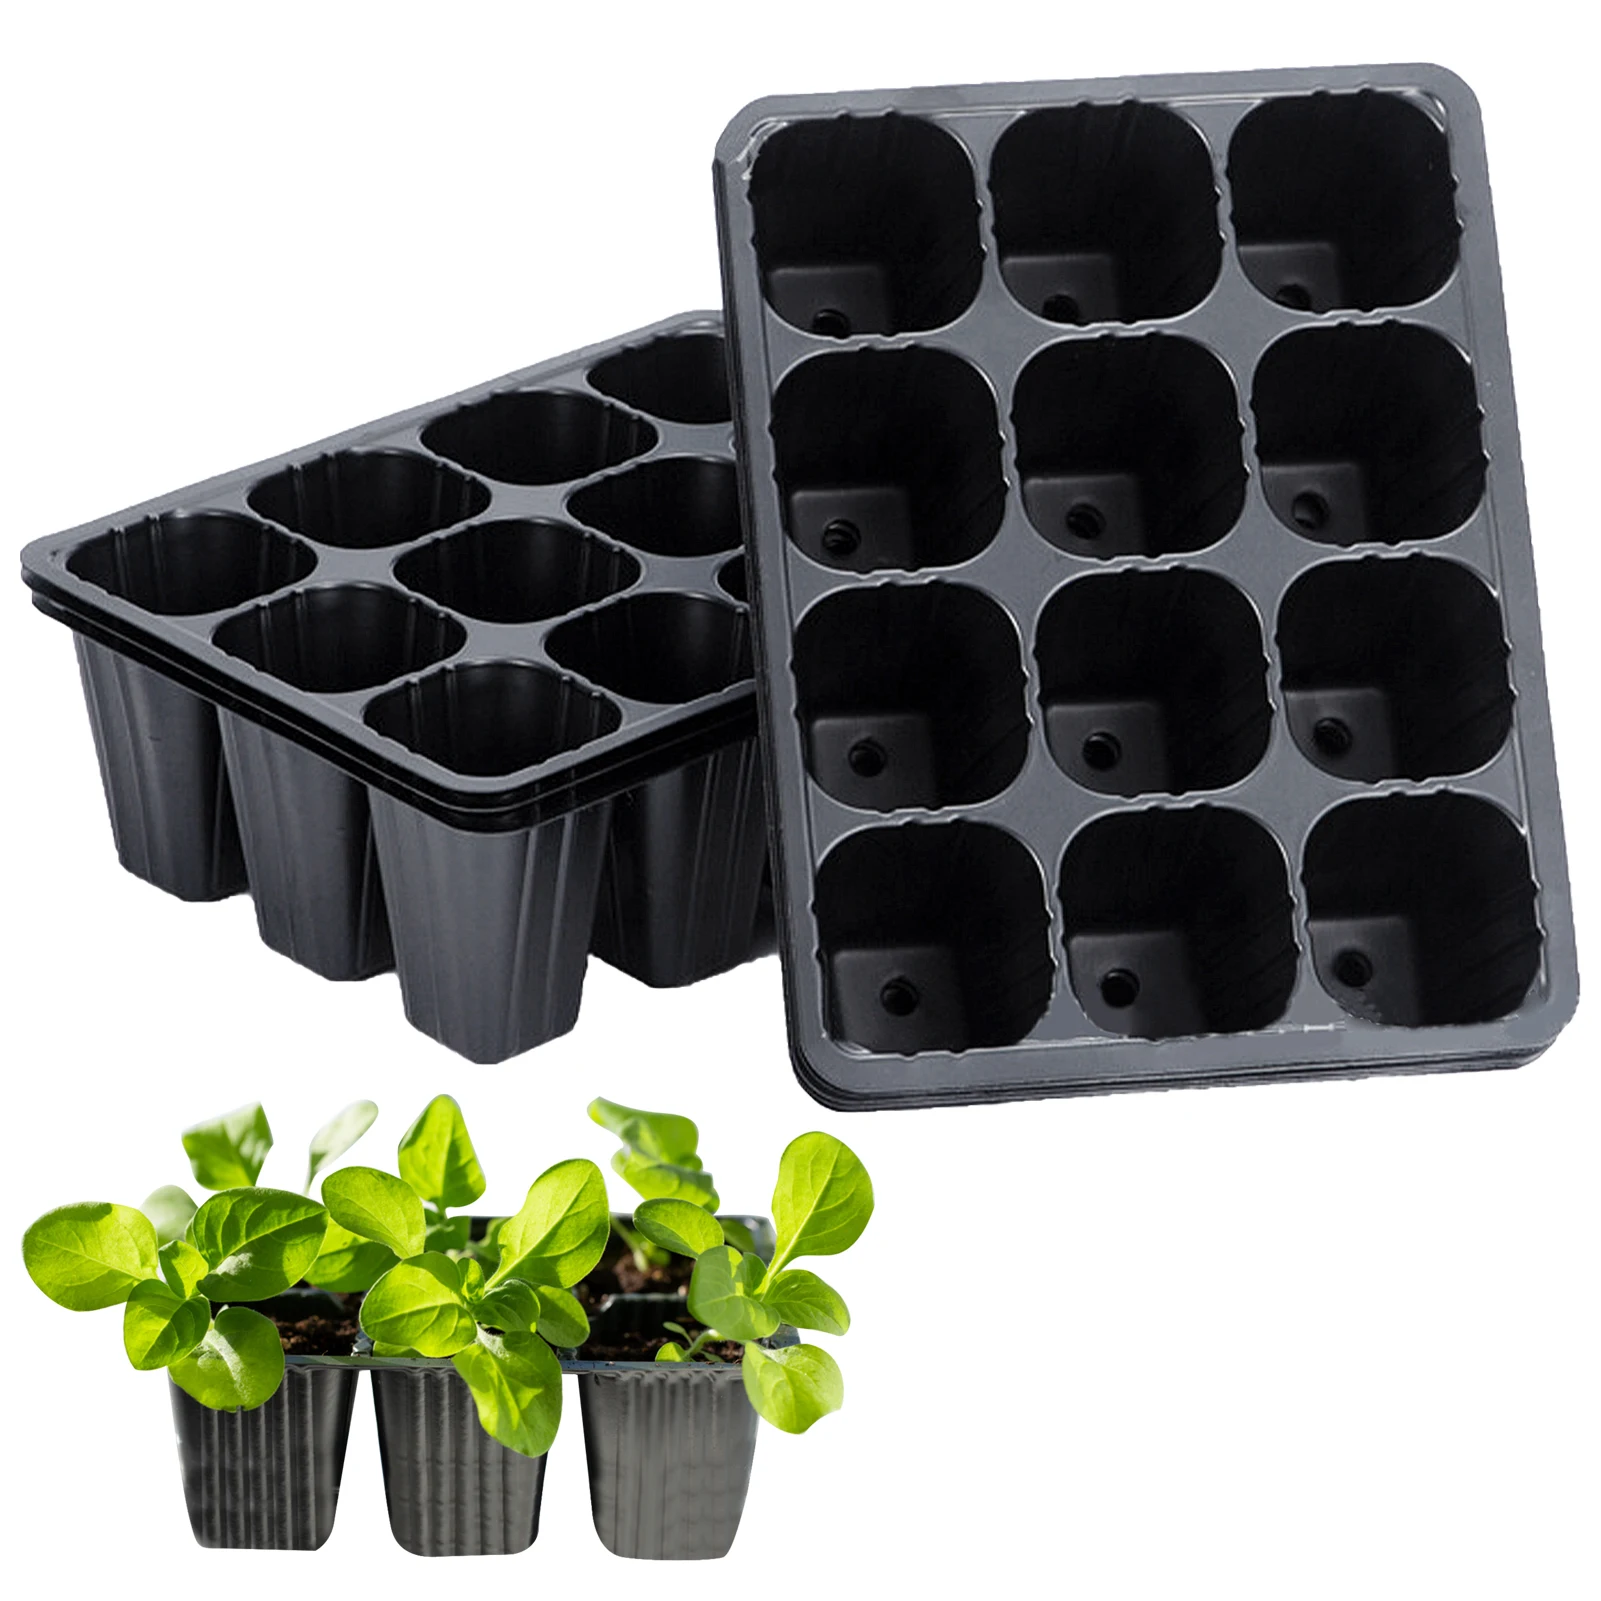 

Cavity Nursery Vegetable Home Cells 10pcs Plant Succulent Tray Propagation Germination Garden Insert Container 12 Seedling